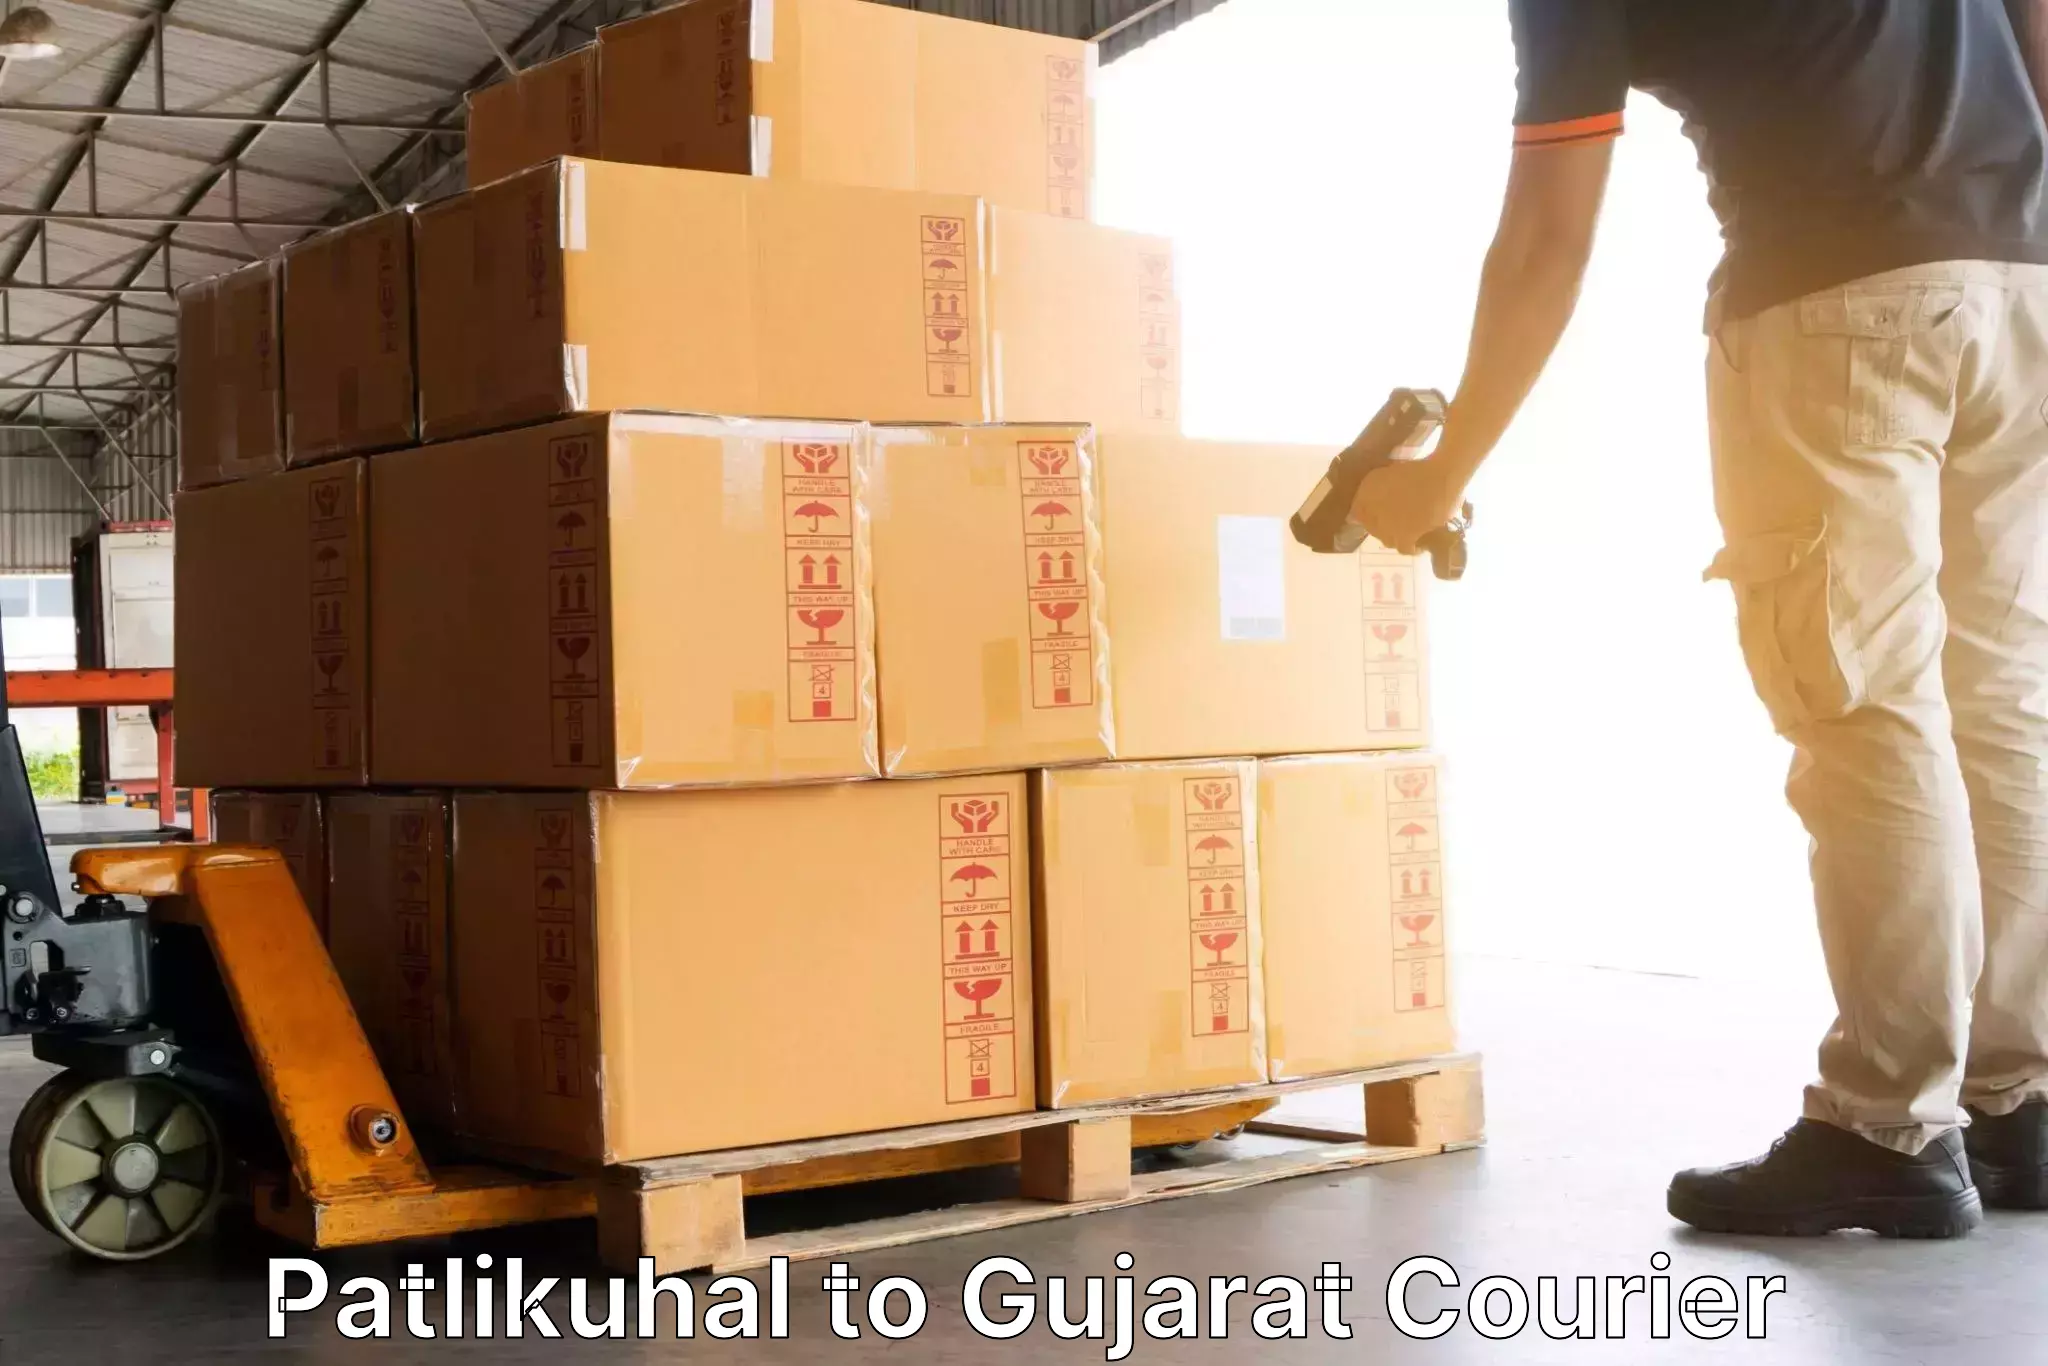 Nationwide delivery network Patlikuhal to Dholera